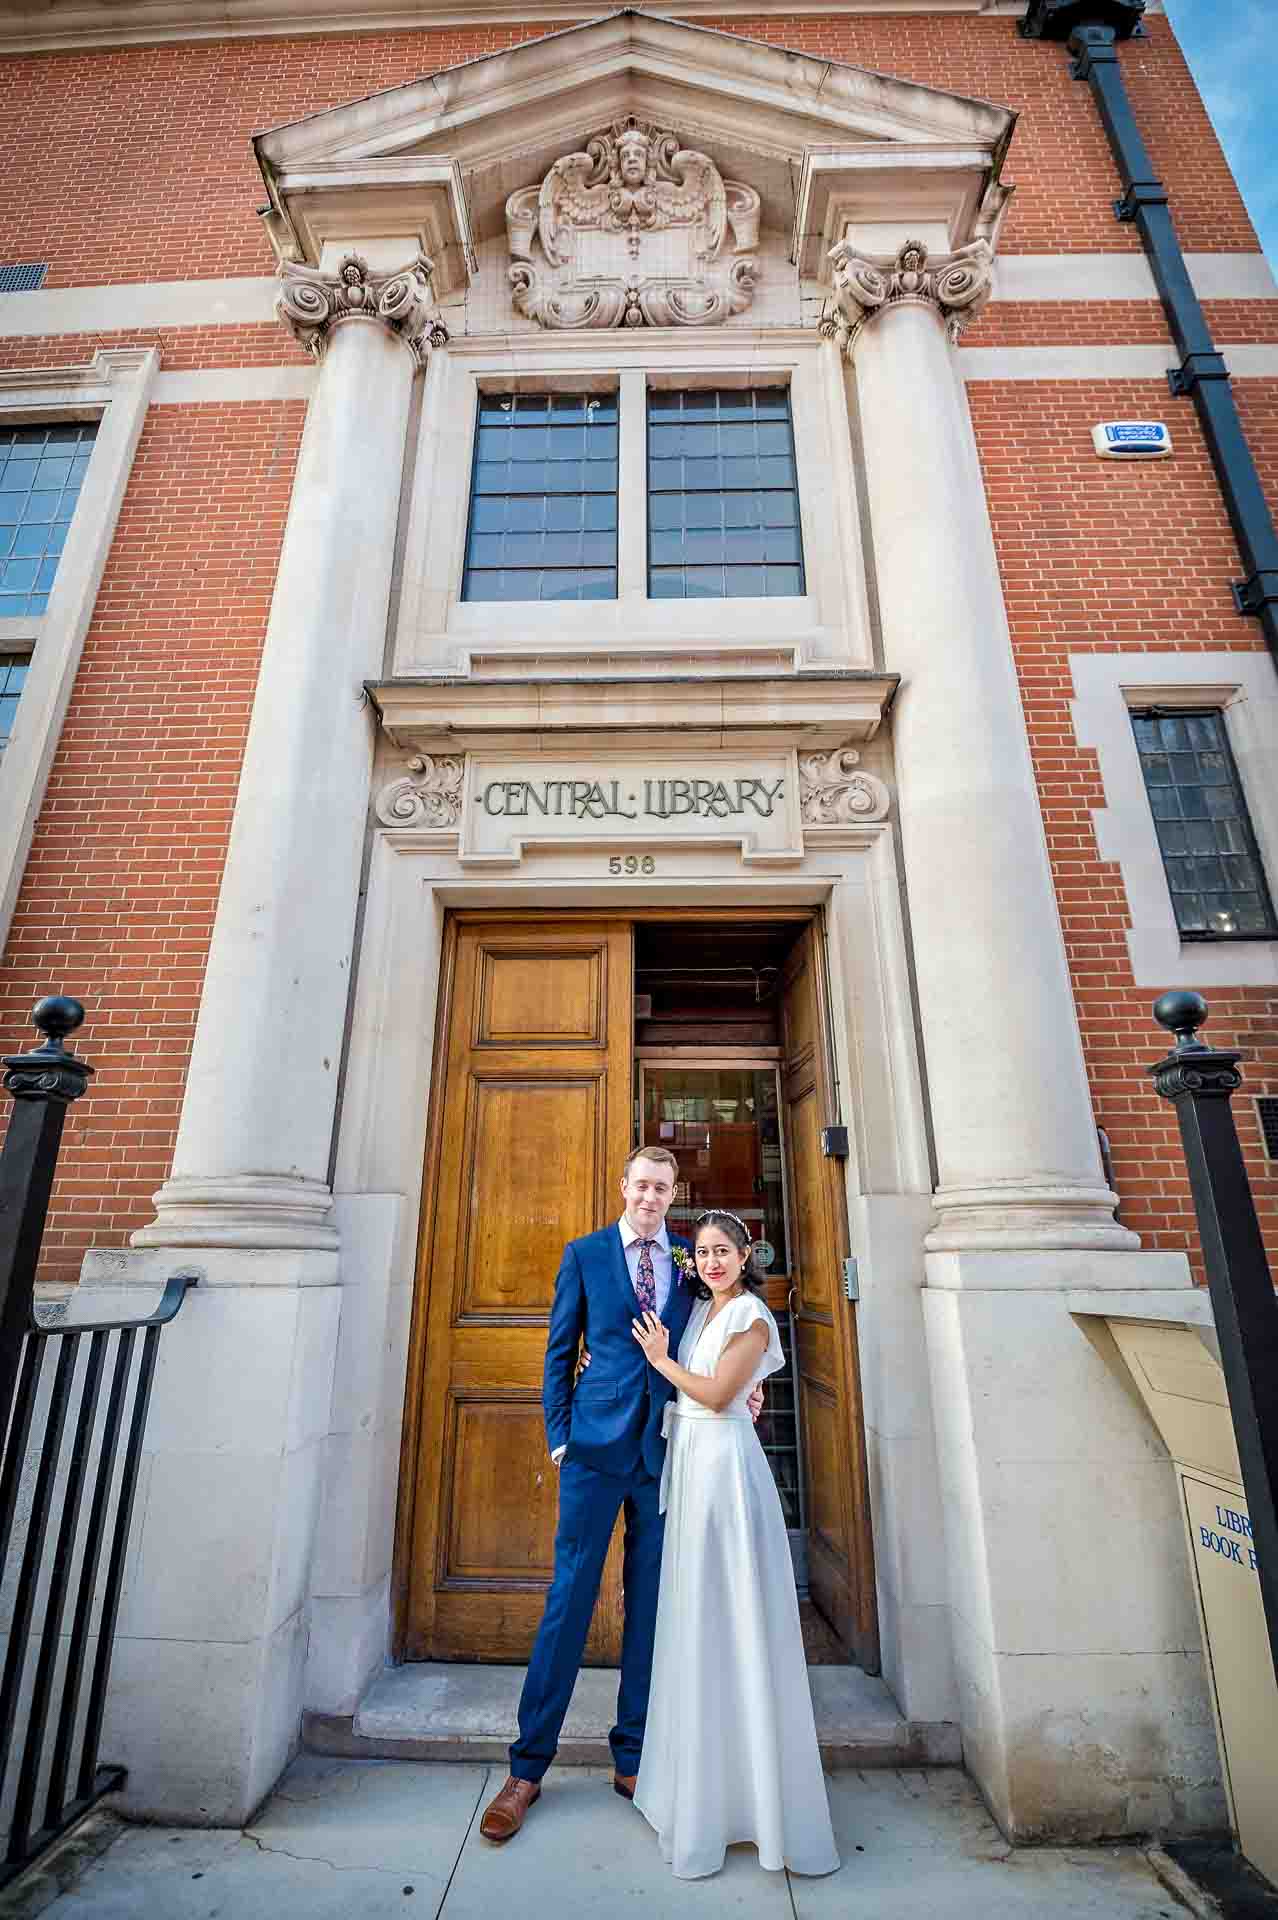 Bride and groom posing outside Fulham Library showing the height of the building